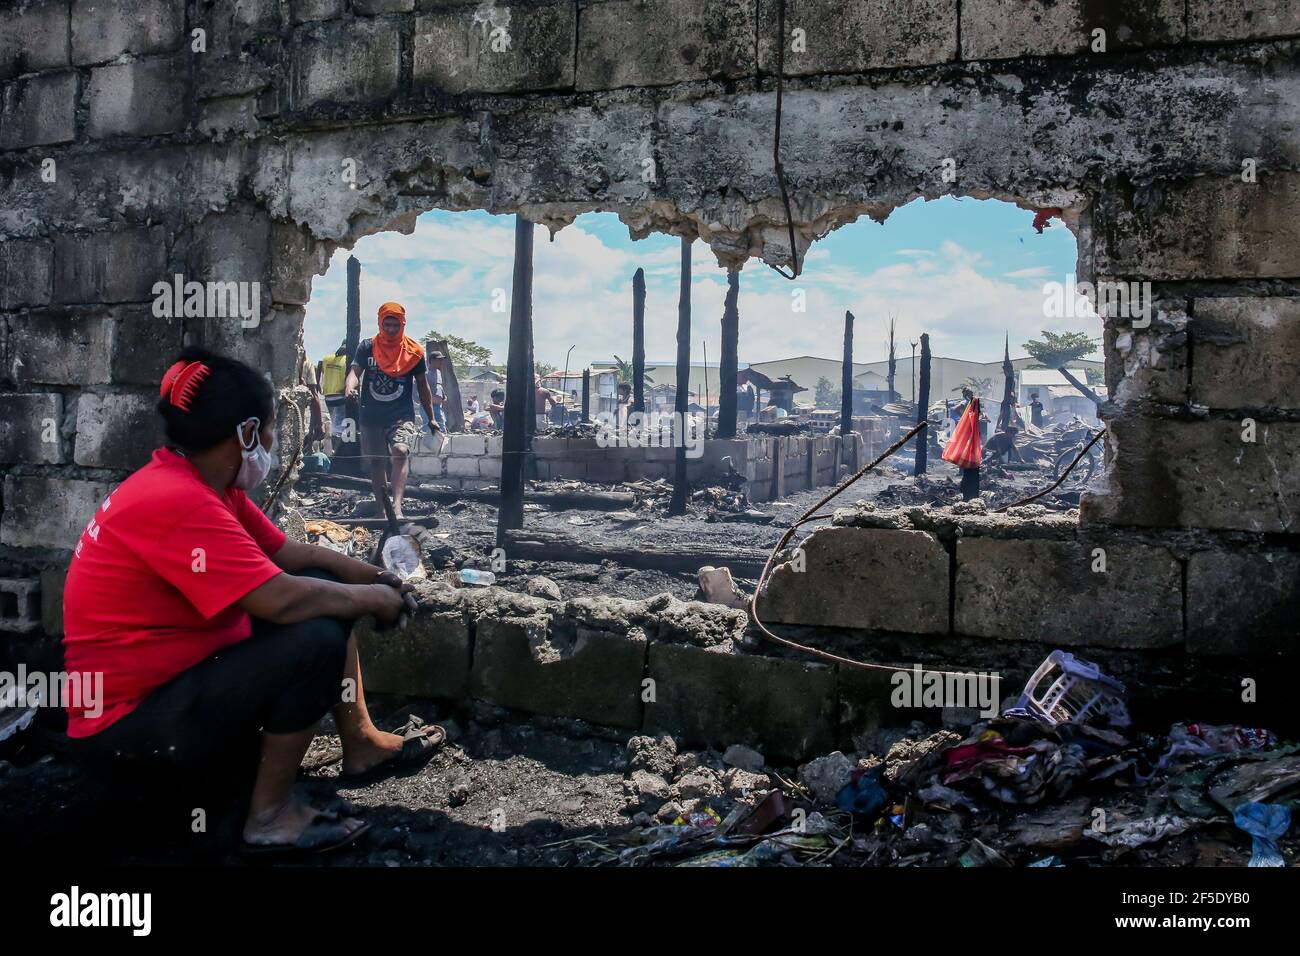 Rizal Province. 26th Mar, 2021. A woman looks through a large hole on a concrete wall as she rests from searching for her belongings from charred home after a fire at a slum area in Rizal Province, the Philippines on March 26, 2021. The Philippine Bureau of Fire Protection said that the fire is believed to have started from one of the houses that was being used as a garment manufacturing area, leaving more than 170 families homeless in the fire. Credit: Rouelle Umali/Xinhua/Alamy Live News Stock Photo